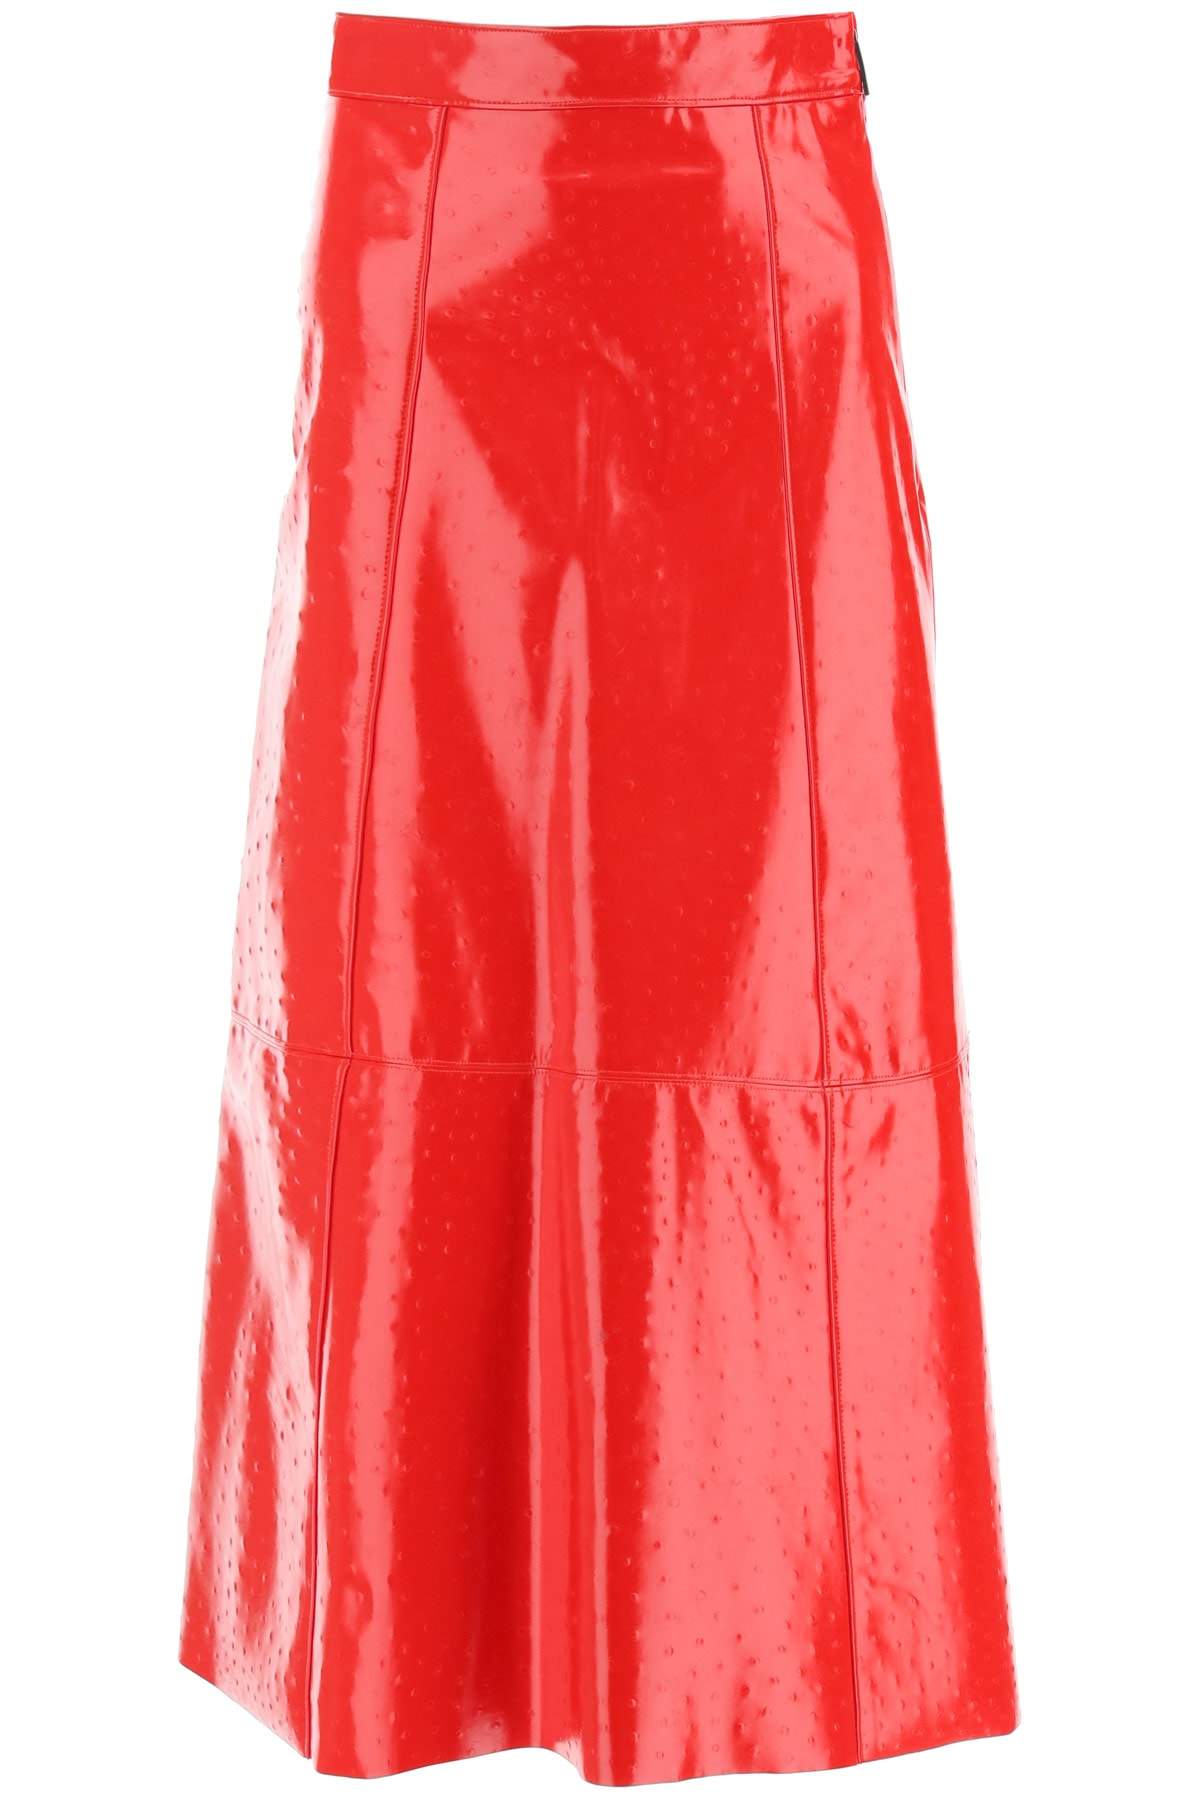 MSGM Ostrich-effect Faux Leather Midi Skirt